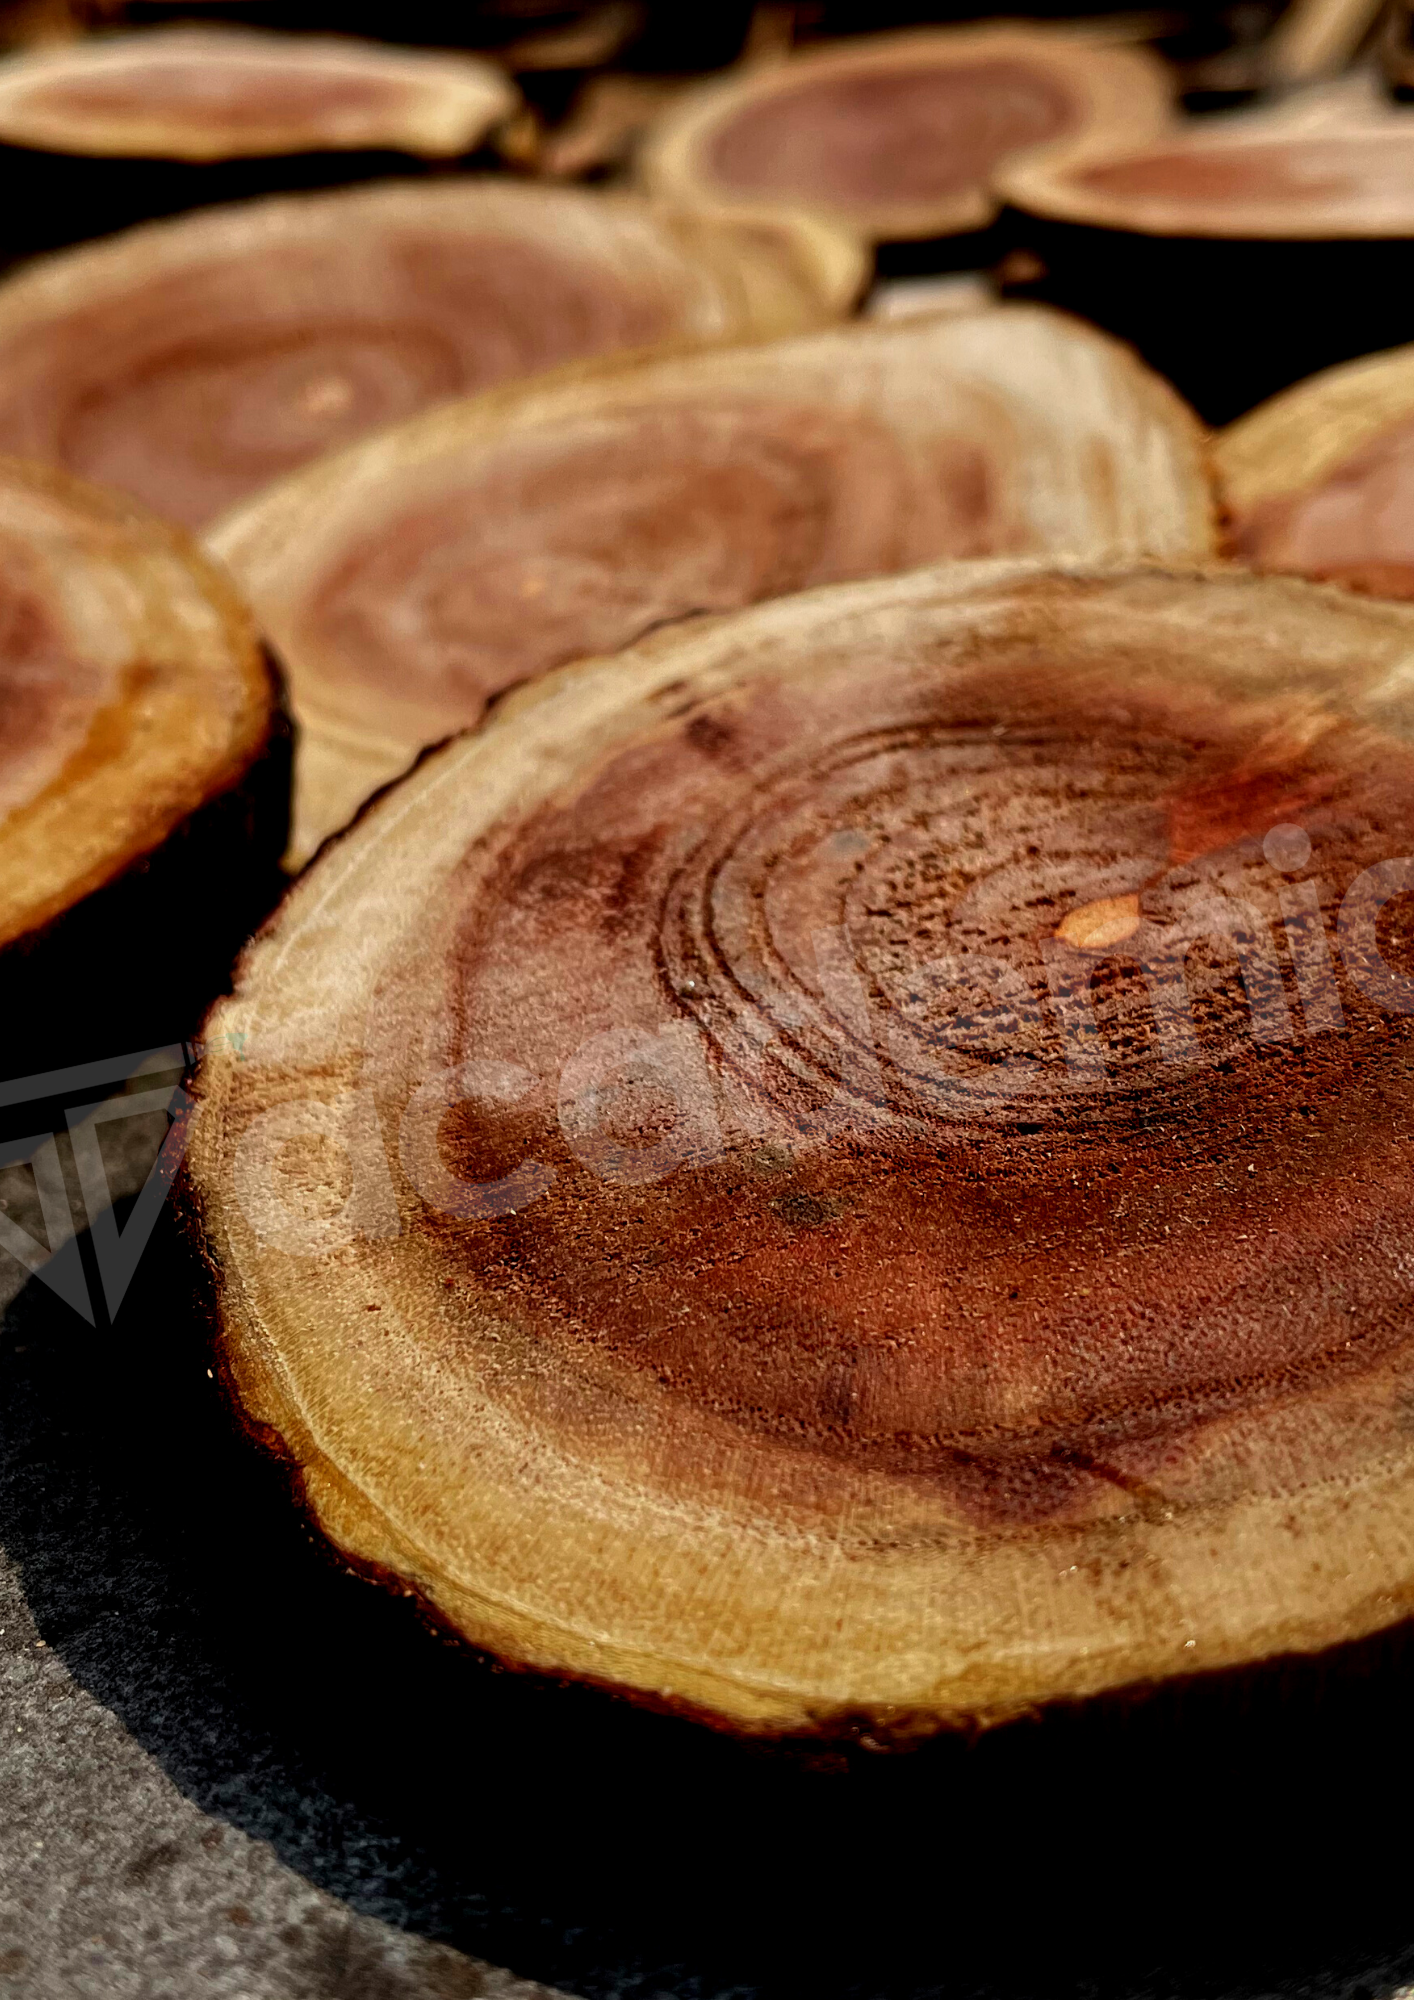 Wooden log coasters